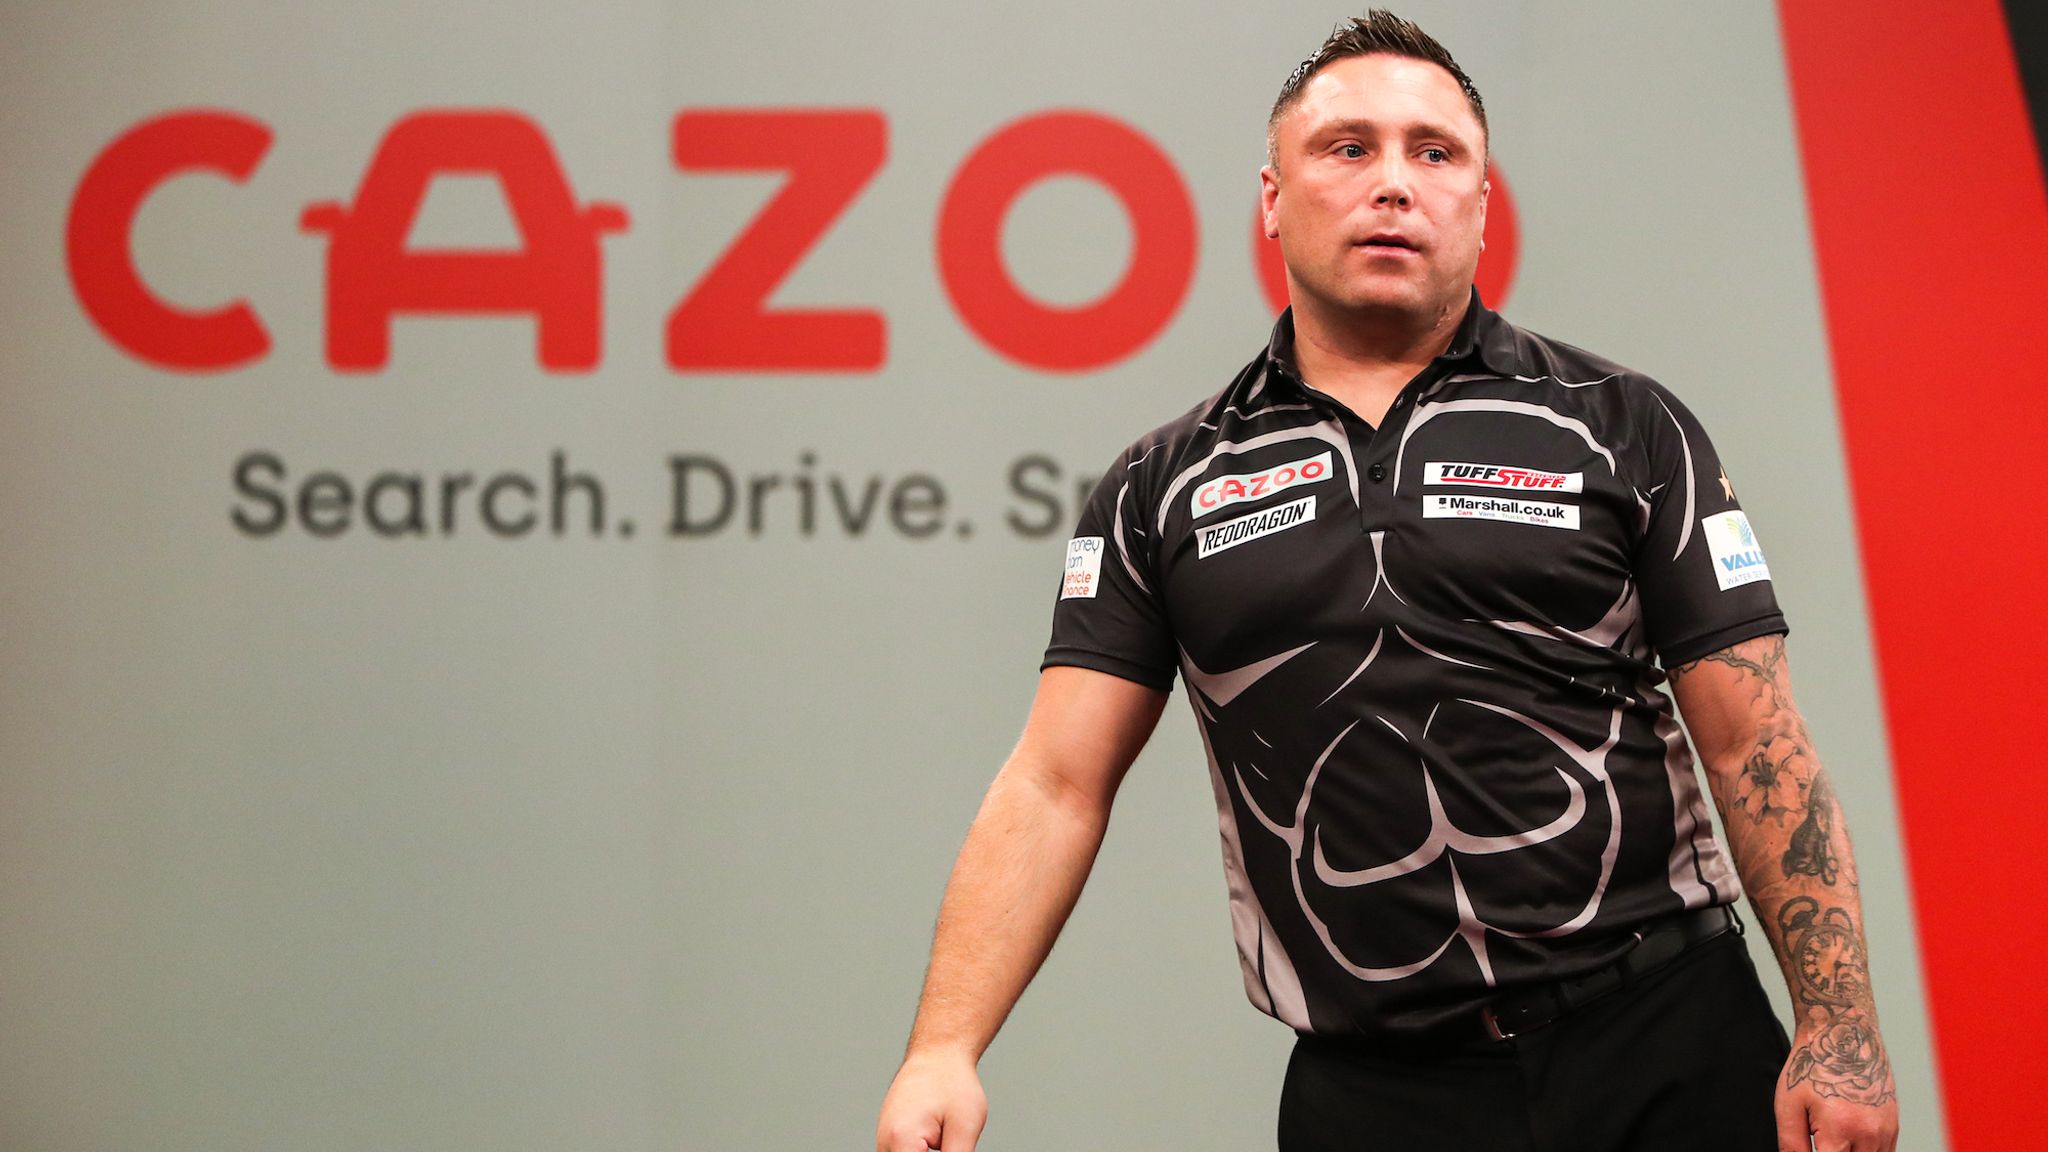 Players Championship: Gerwyn Price and Michael Smith among casualties in | Darts News | Sky Sports